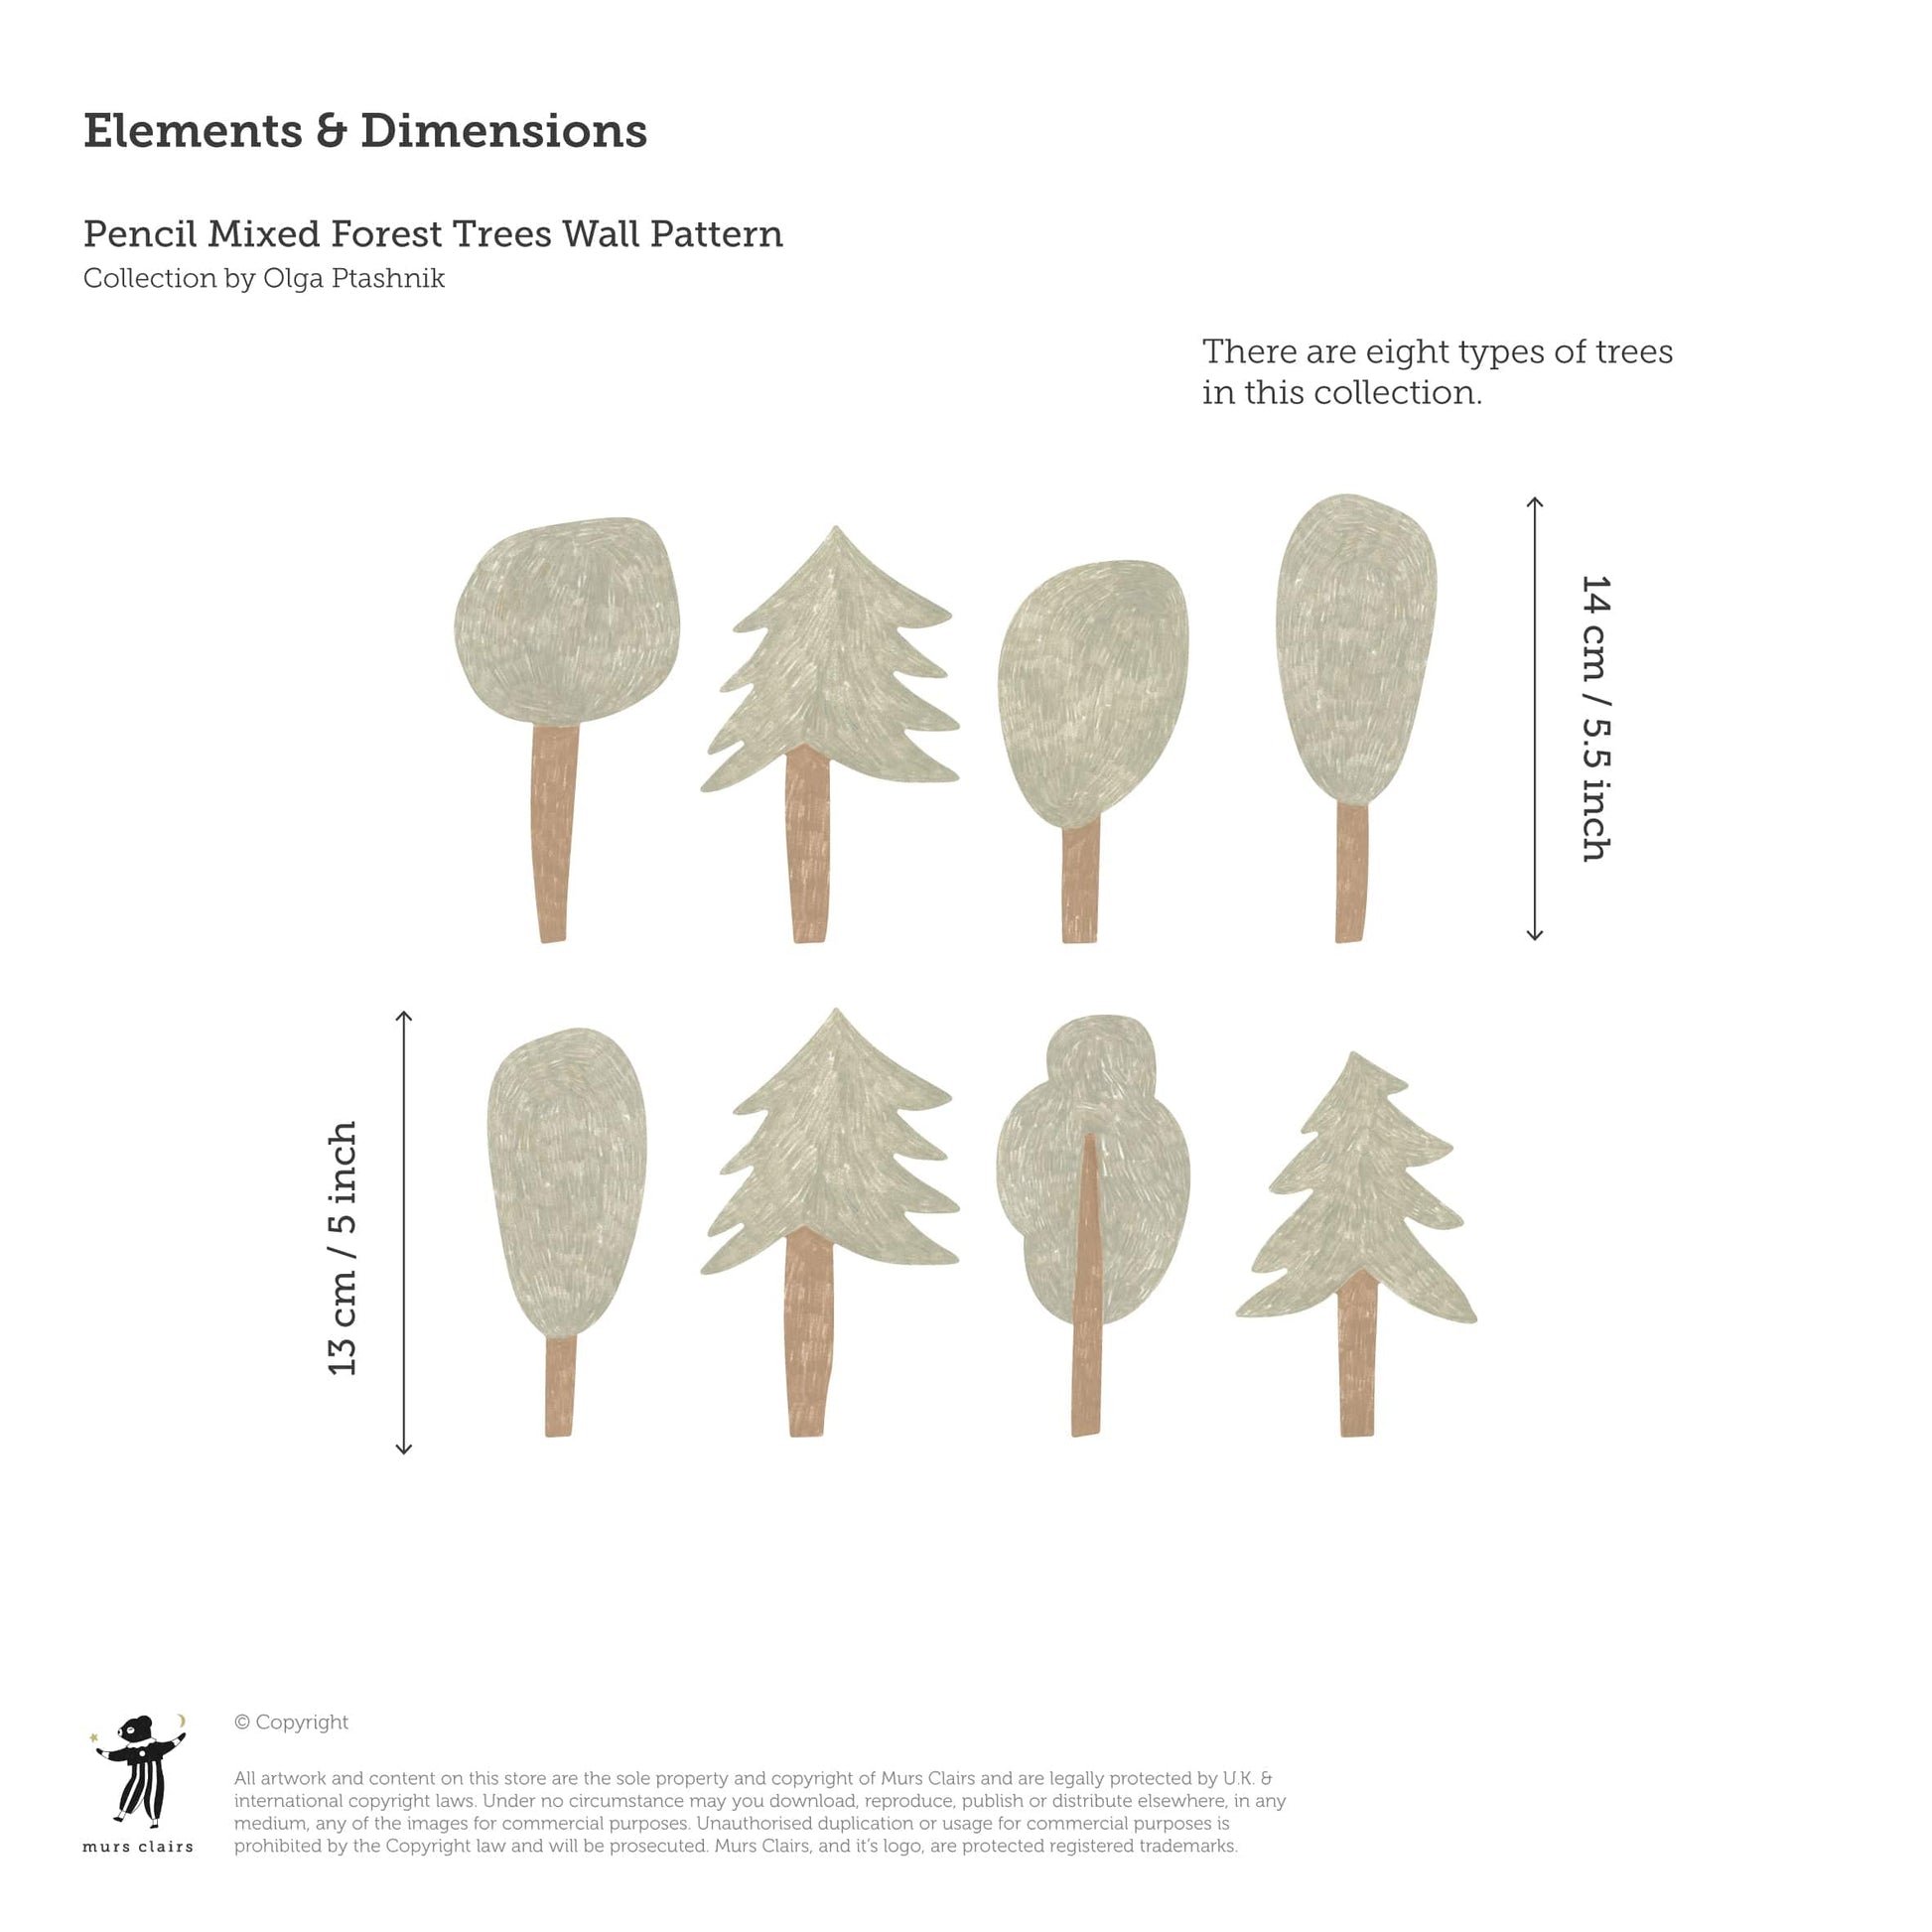 Image showing the heights of the 8 different types of tree sticker. 4 are 14cm tall and 4 are 15cm tall